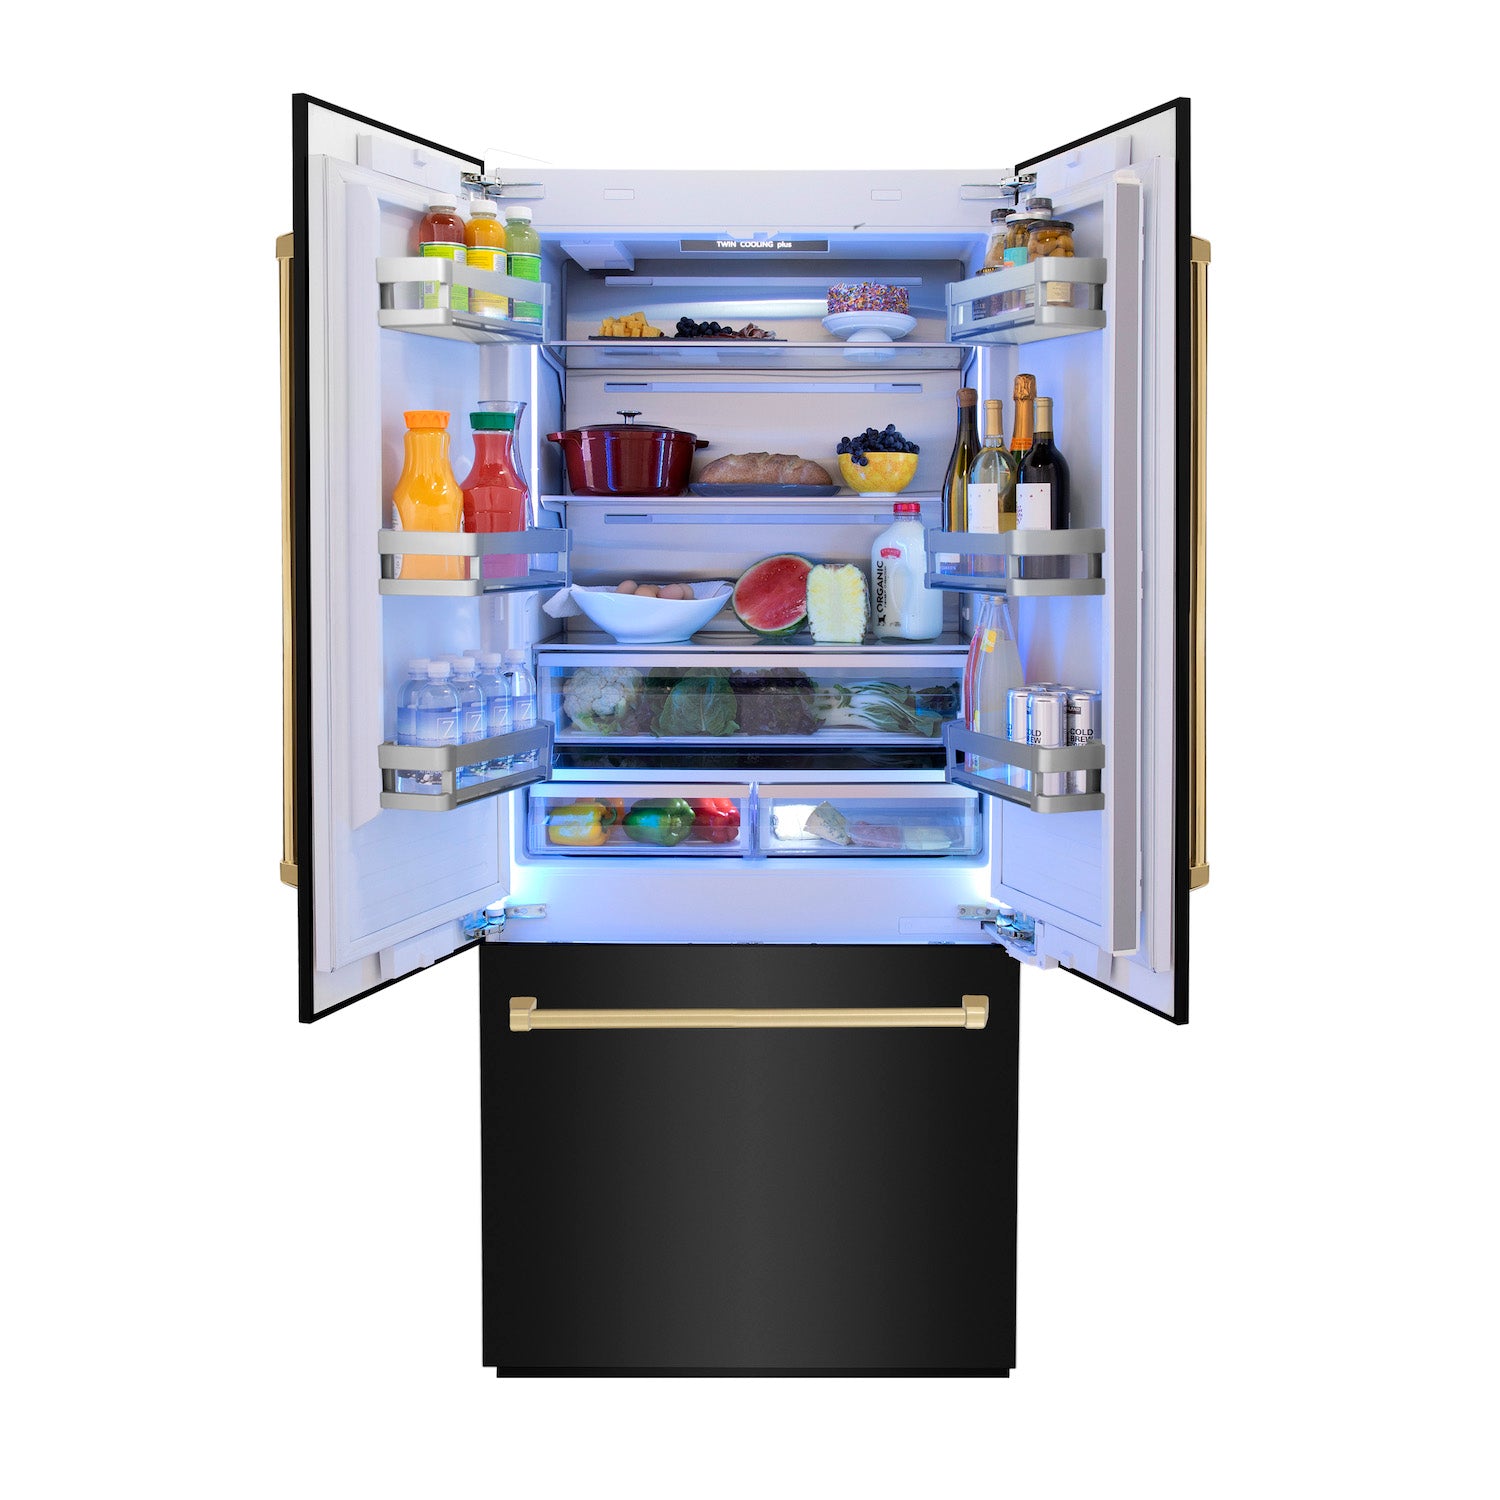 ZLINE Autograph Edition 36 in. 19.6 cu. ft. Built-in 2-Door Bottom Freezer Refrigerator with Internal Water and Ice Dispenser in Black Stainless Steel with Polished Gold Accents (RBIVZ-BS-36-G) front, open with food inside refrigeration compartment.